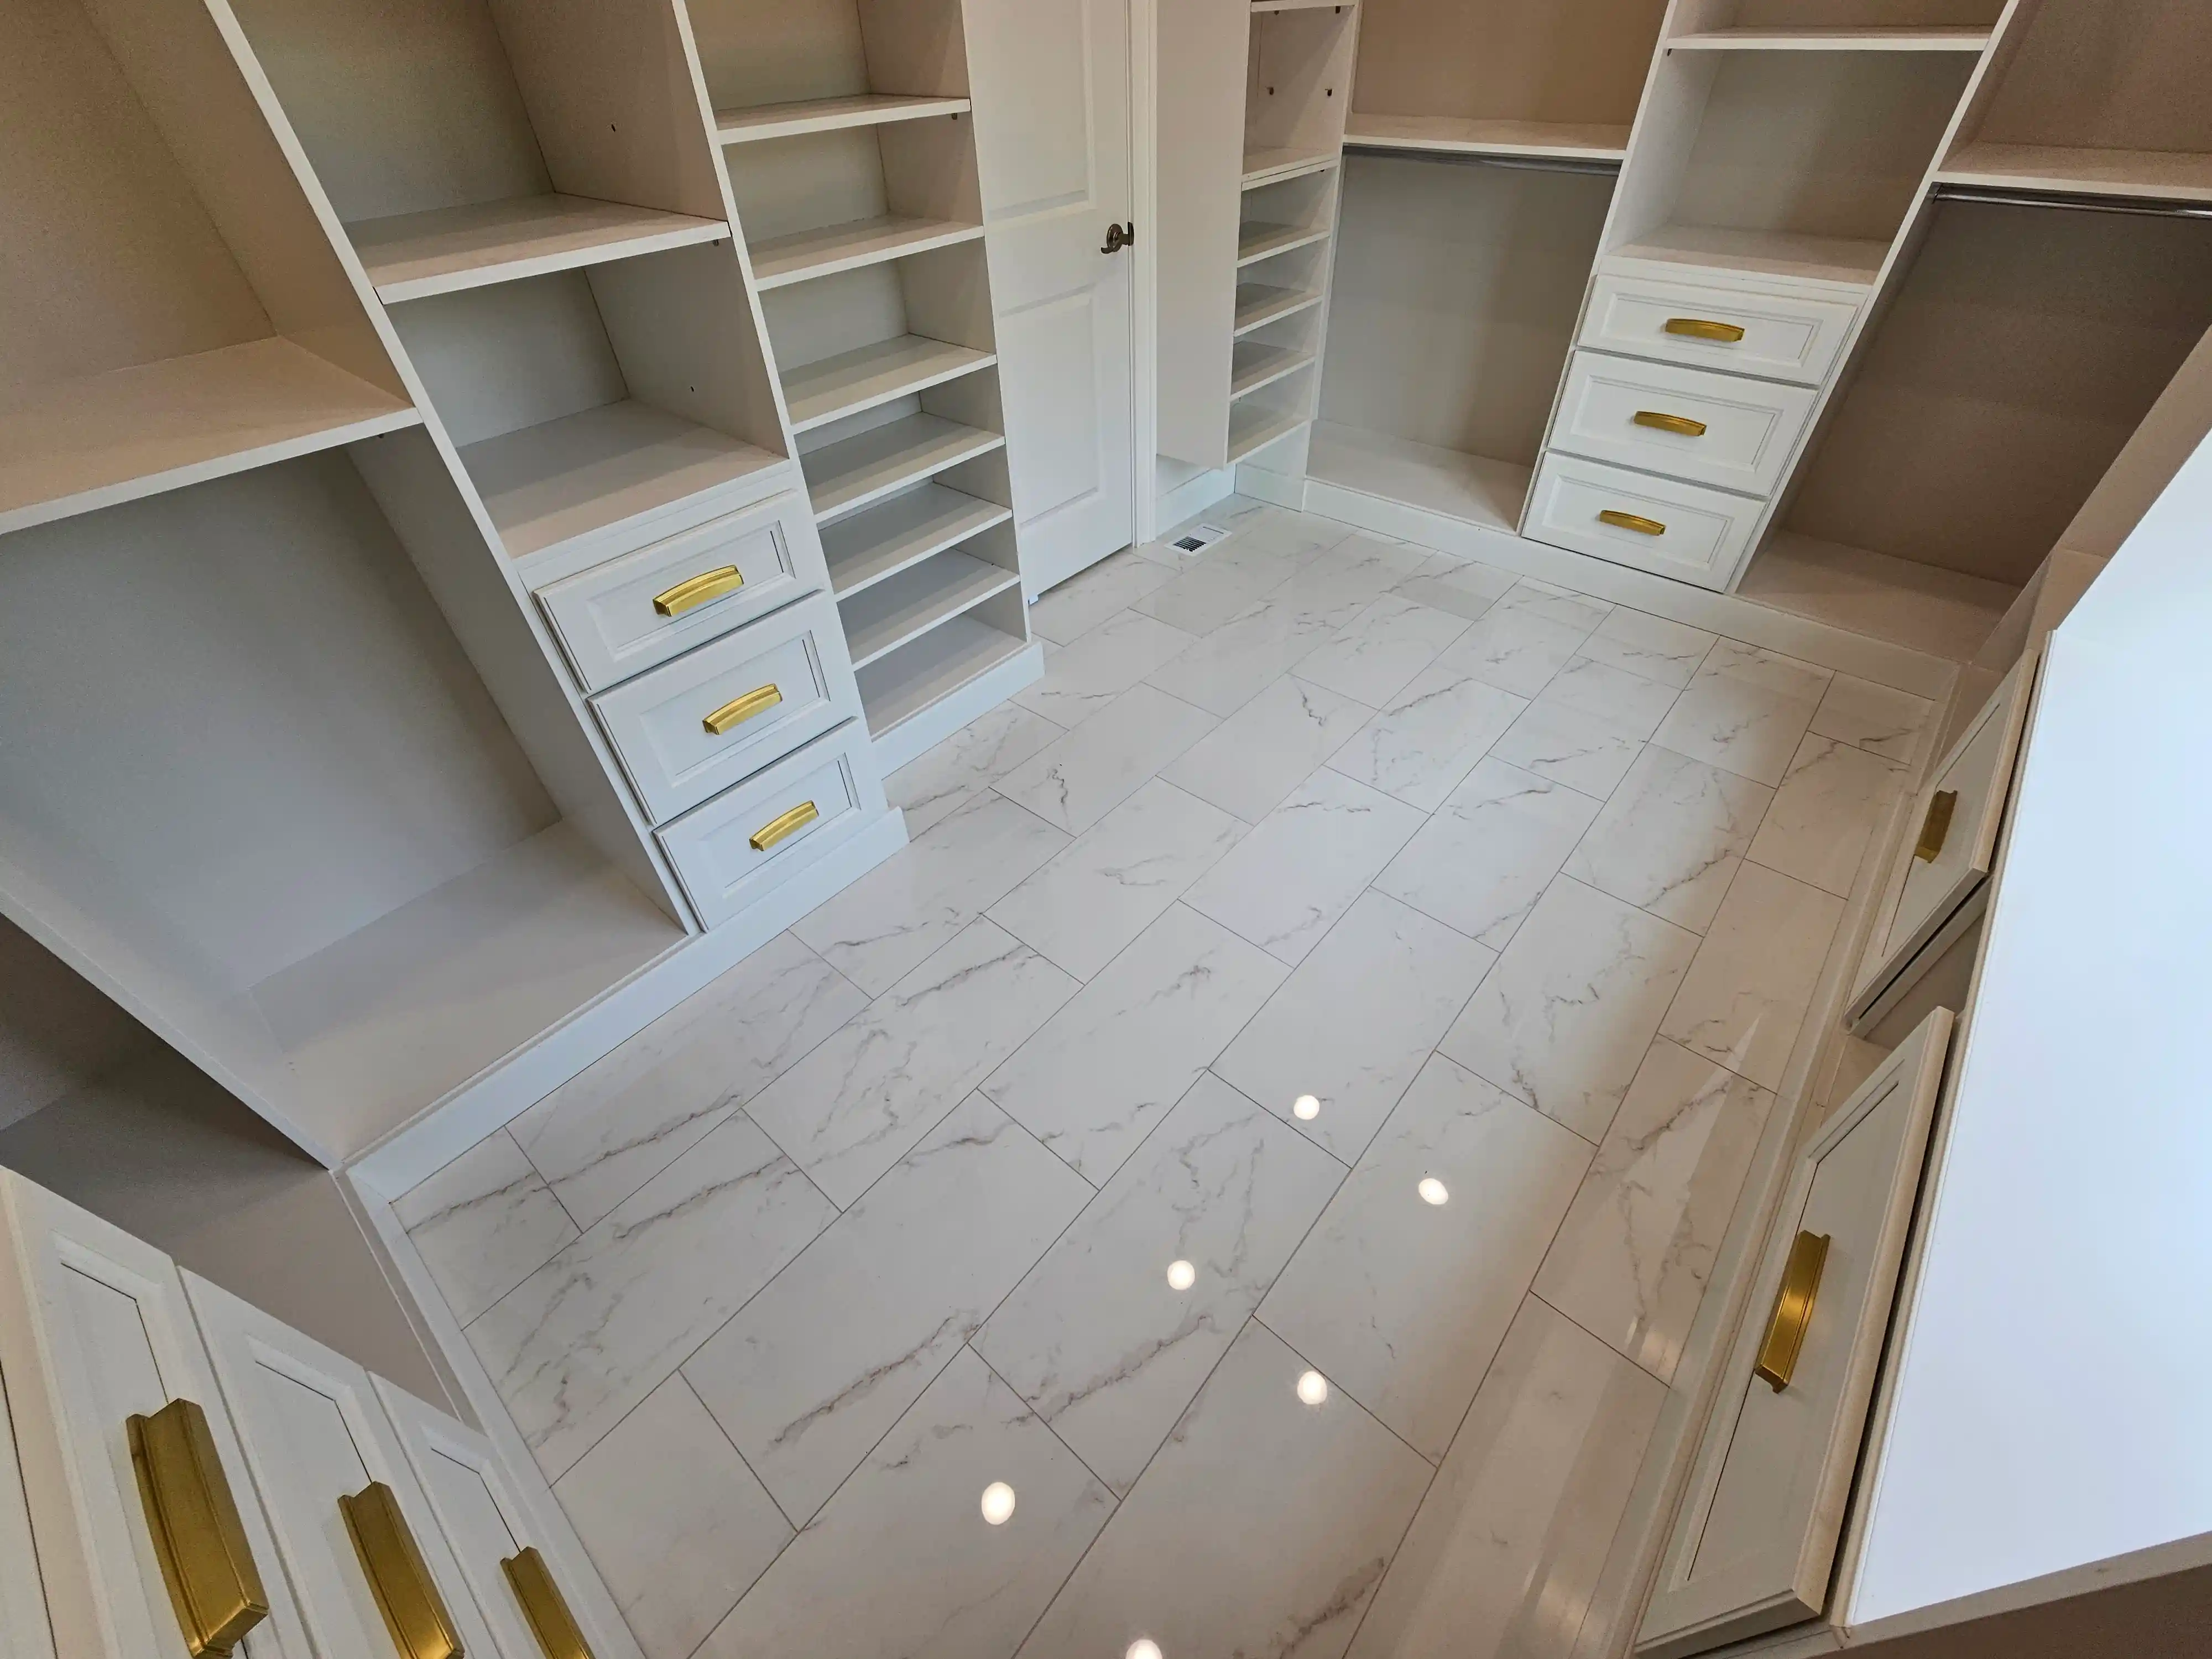 Stylish Knoxville Closet Design - Organize and Maximize Your Storage